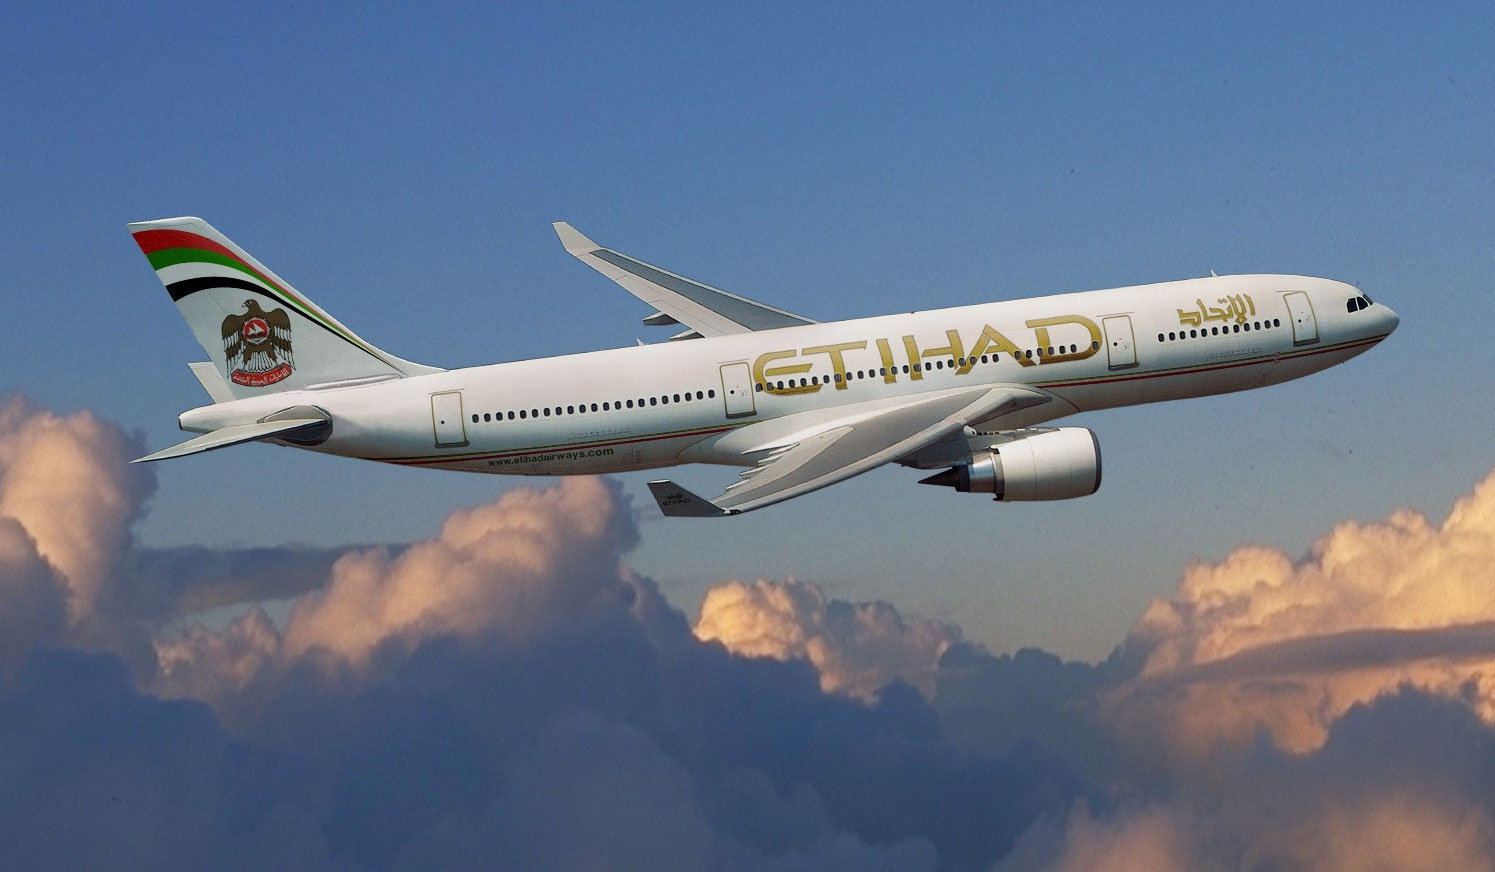 Flying Etihad Airways: What You Need To Know